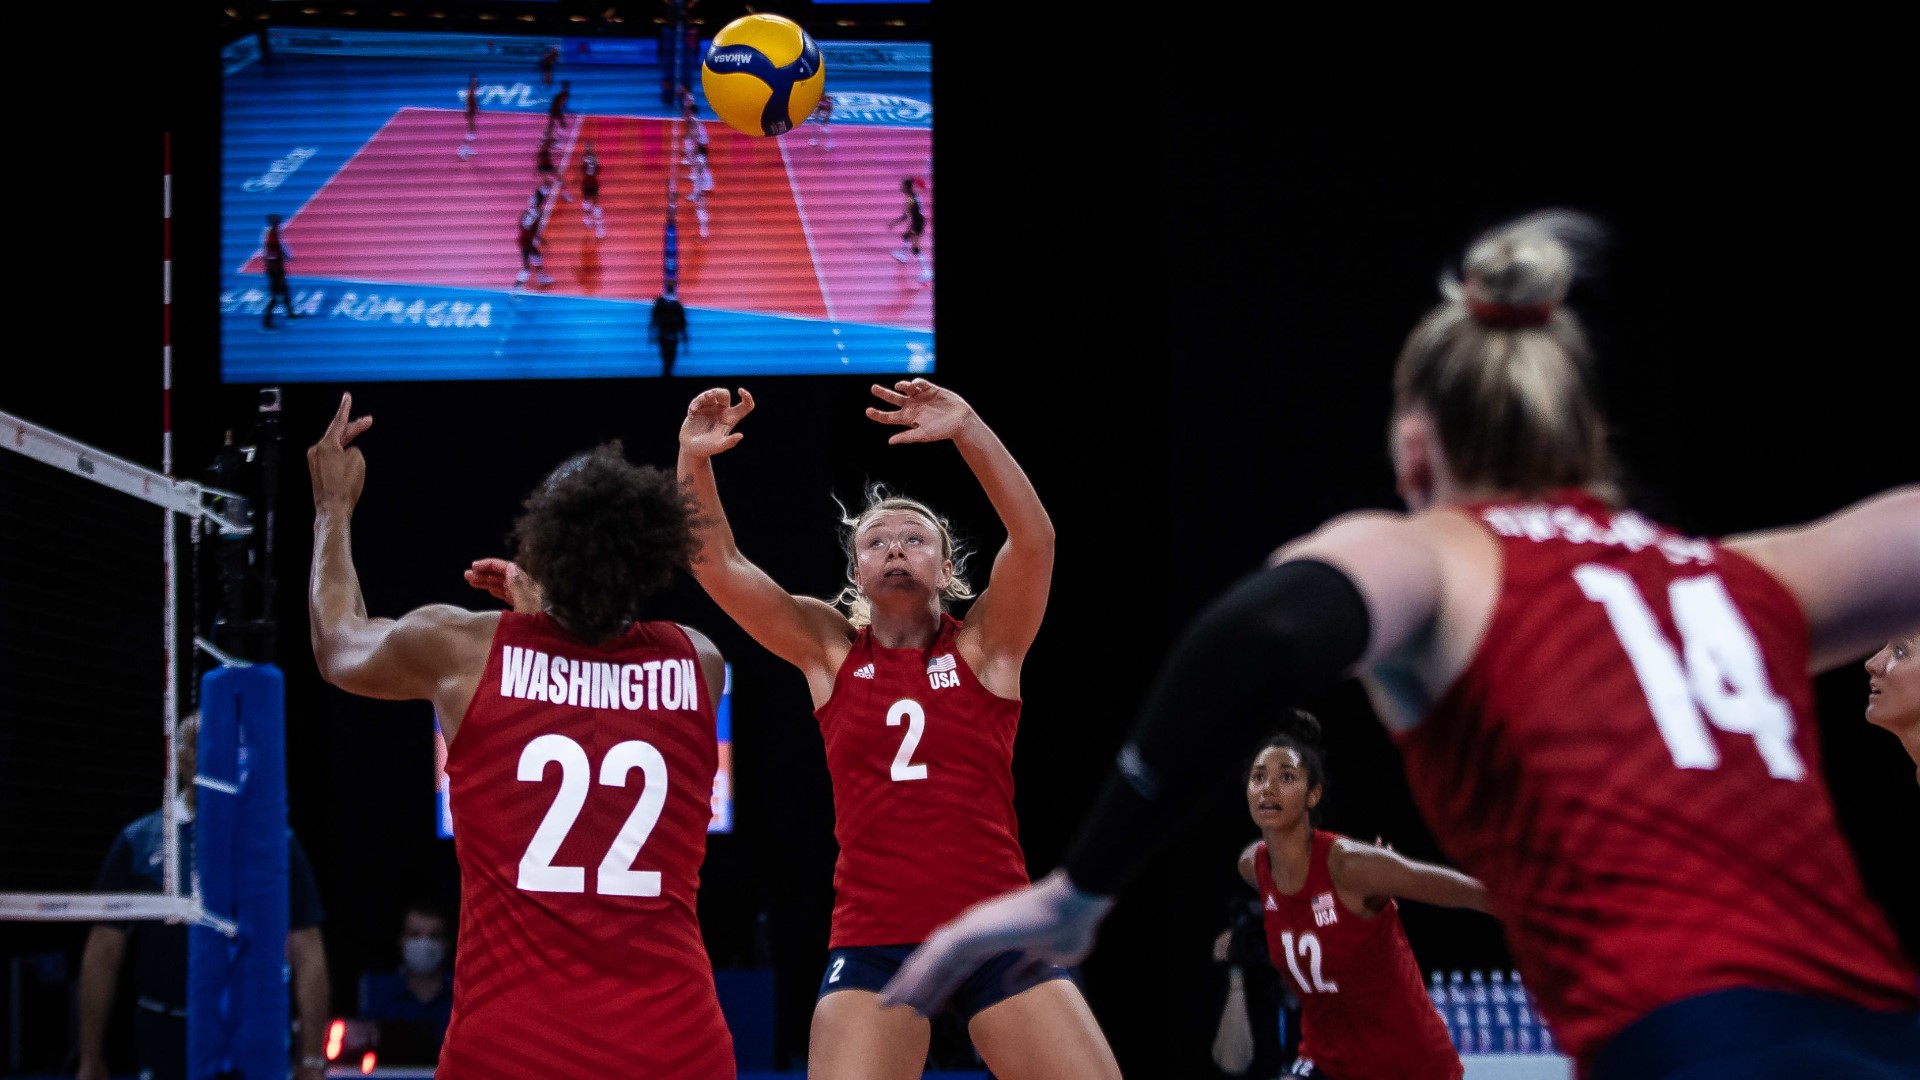 Jordyn Poulter is the starting setter for the US Women's Volleyball team. Her former coach is now preparing her younger sister for greatness at  University of Denver